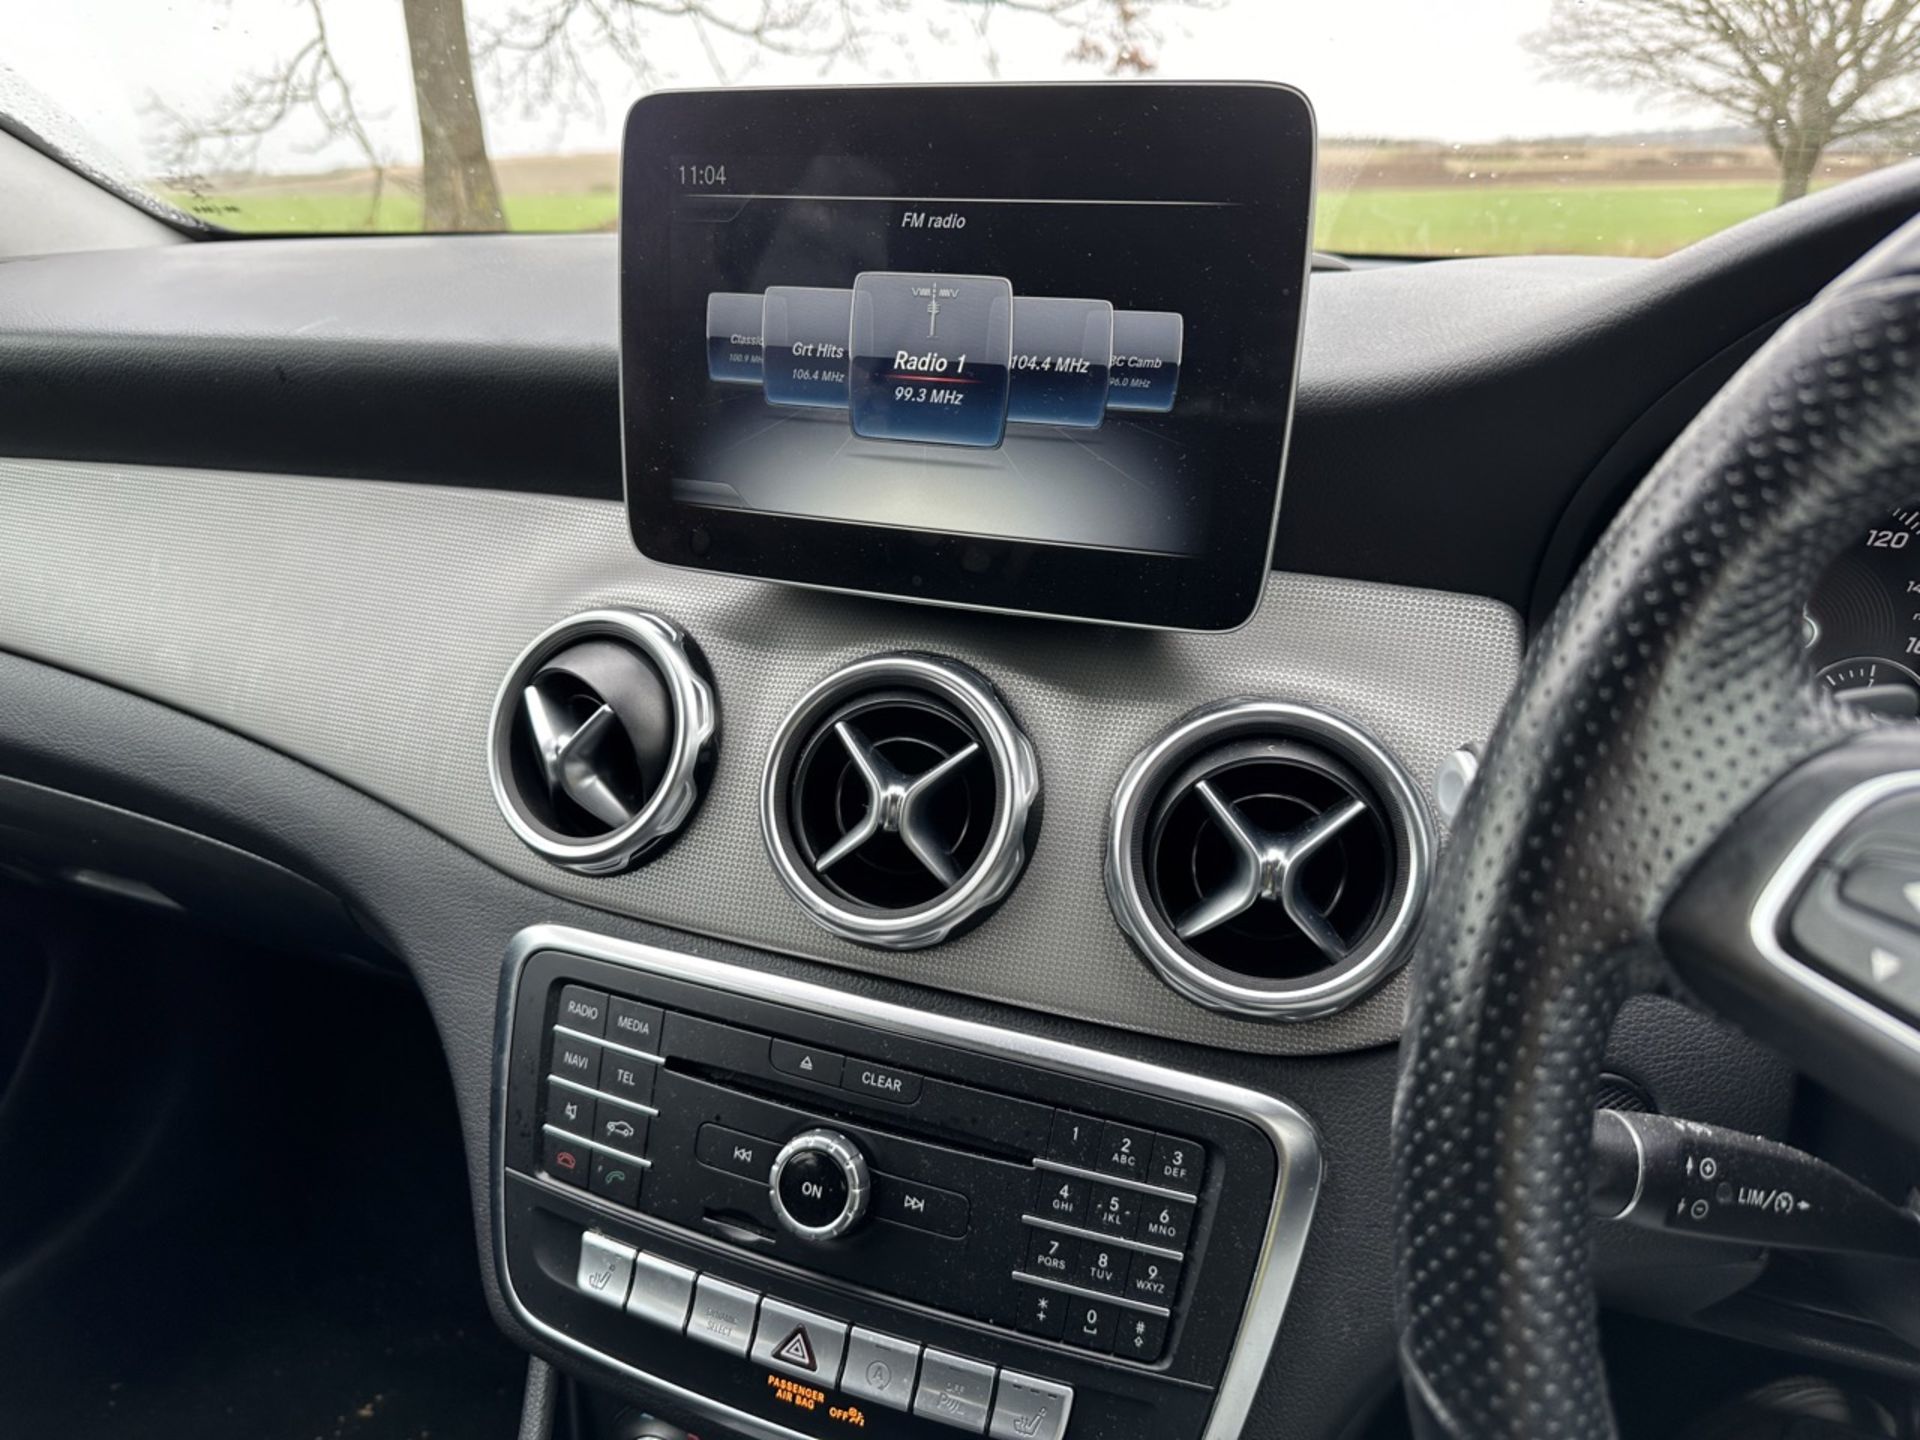 MERCEDES GLA 200d AUTO "SPORT EXECUTIVE" 2019 MODEL - LEATHER - LOW MILES - AIR CON - Image 17 of 17